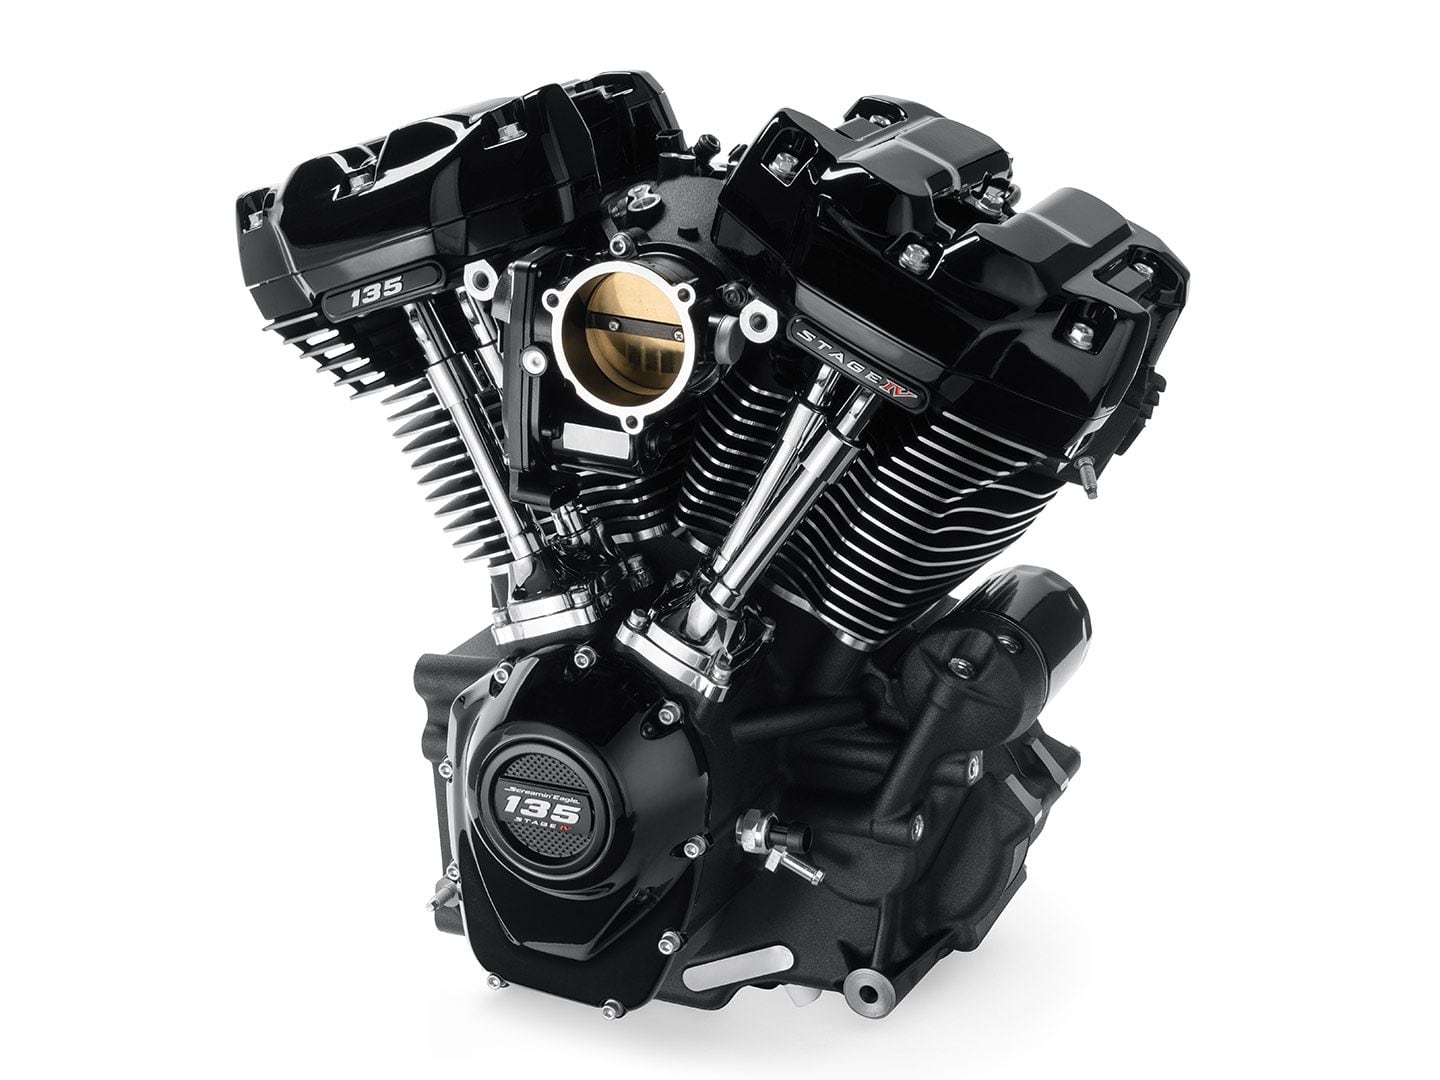 Harley-Davidson has incorporated lessons learned in King of the Baggers racing in its new 135ci Screamin’ Eagle Stage IV crate engine.